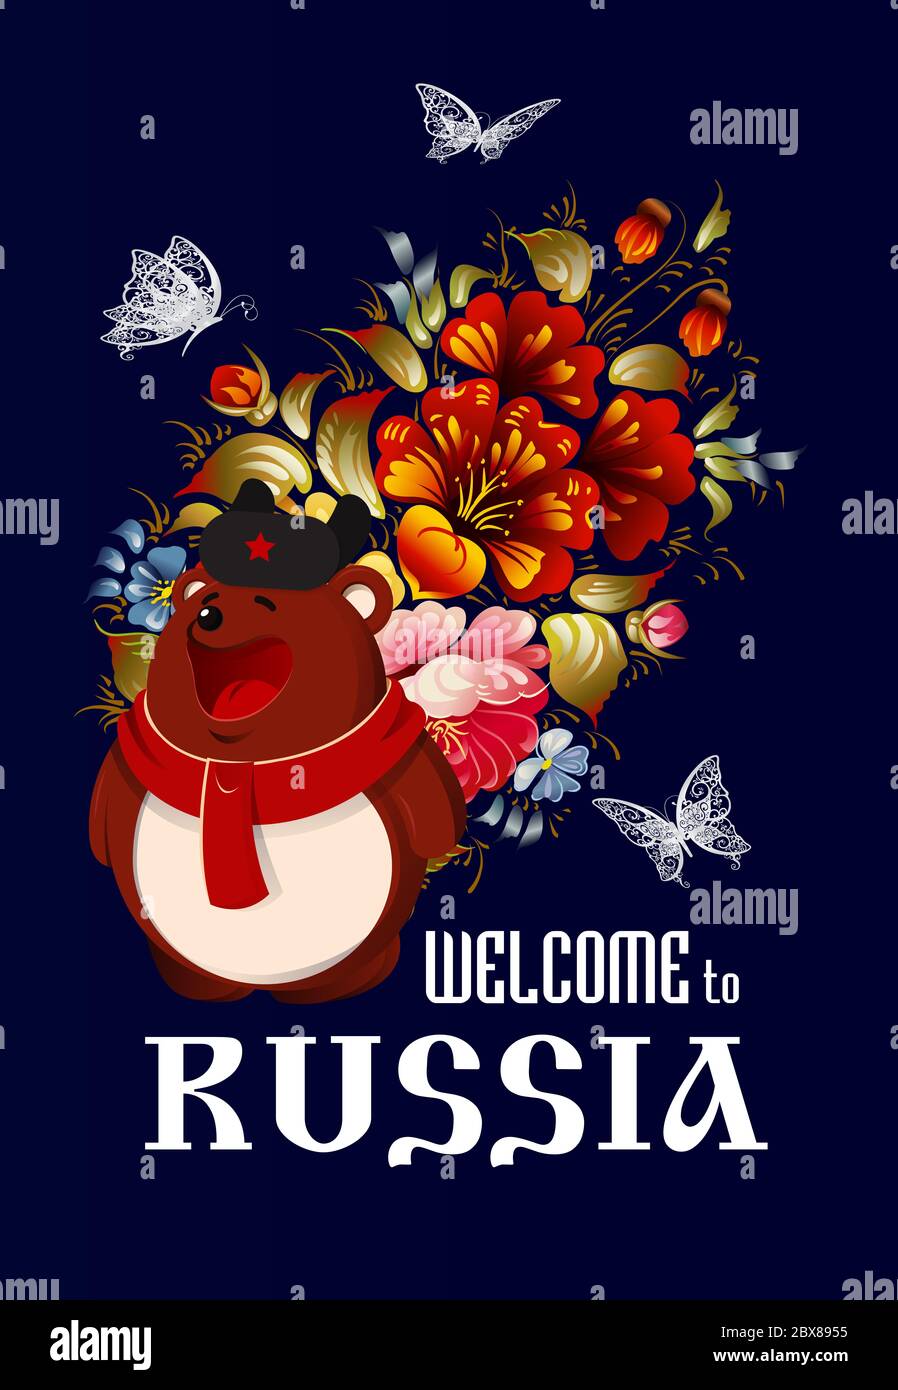 Welcome to Russia. Brown bear in hat and floral ornament in Russian style. Stock Photo